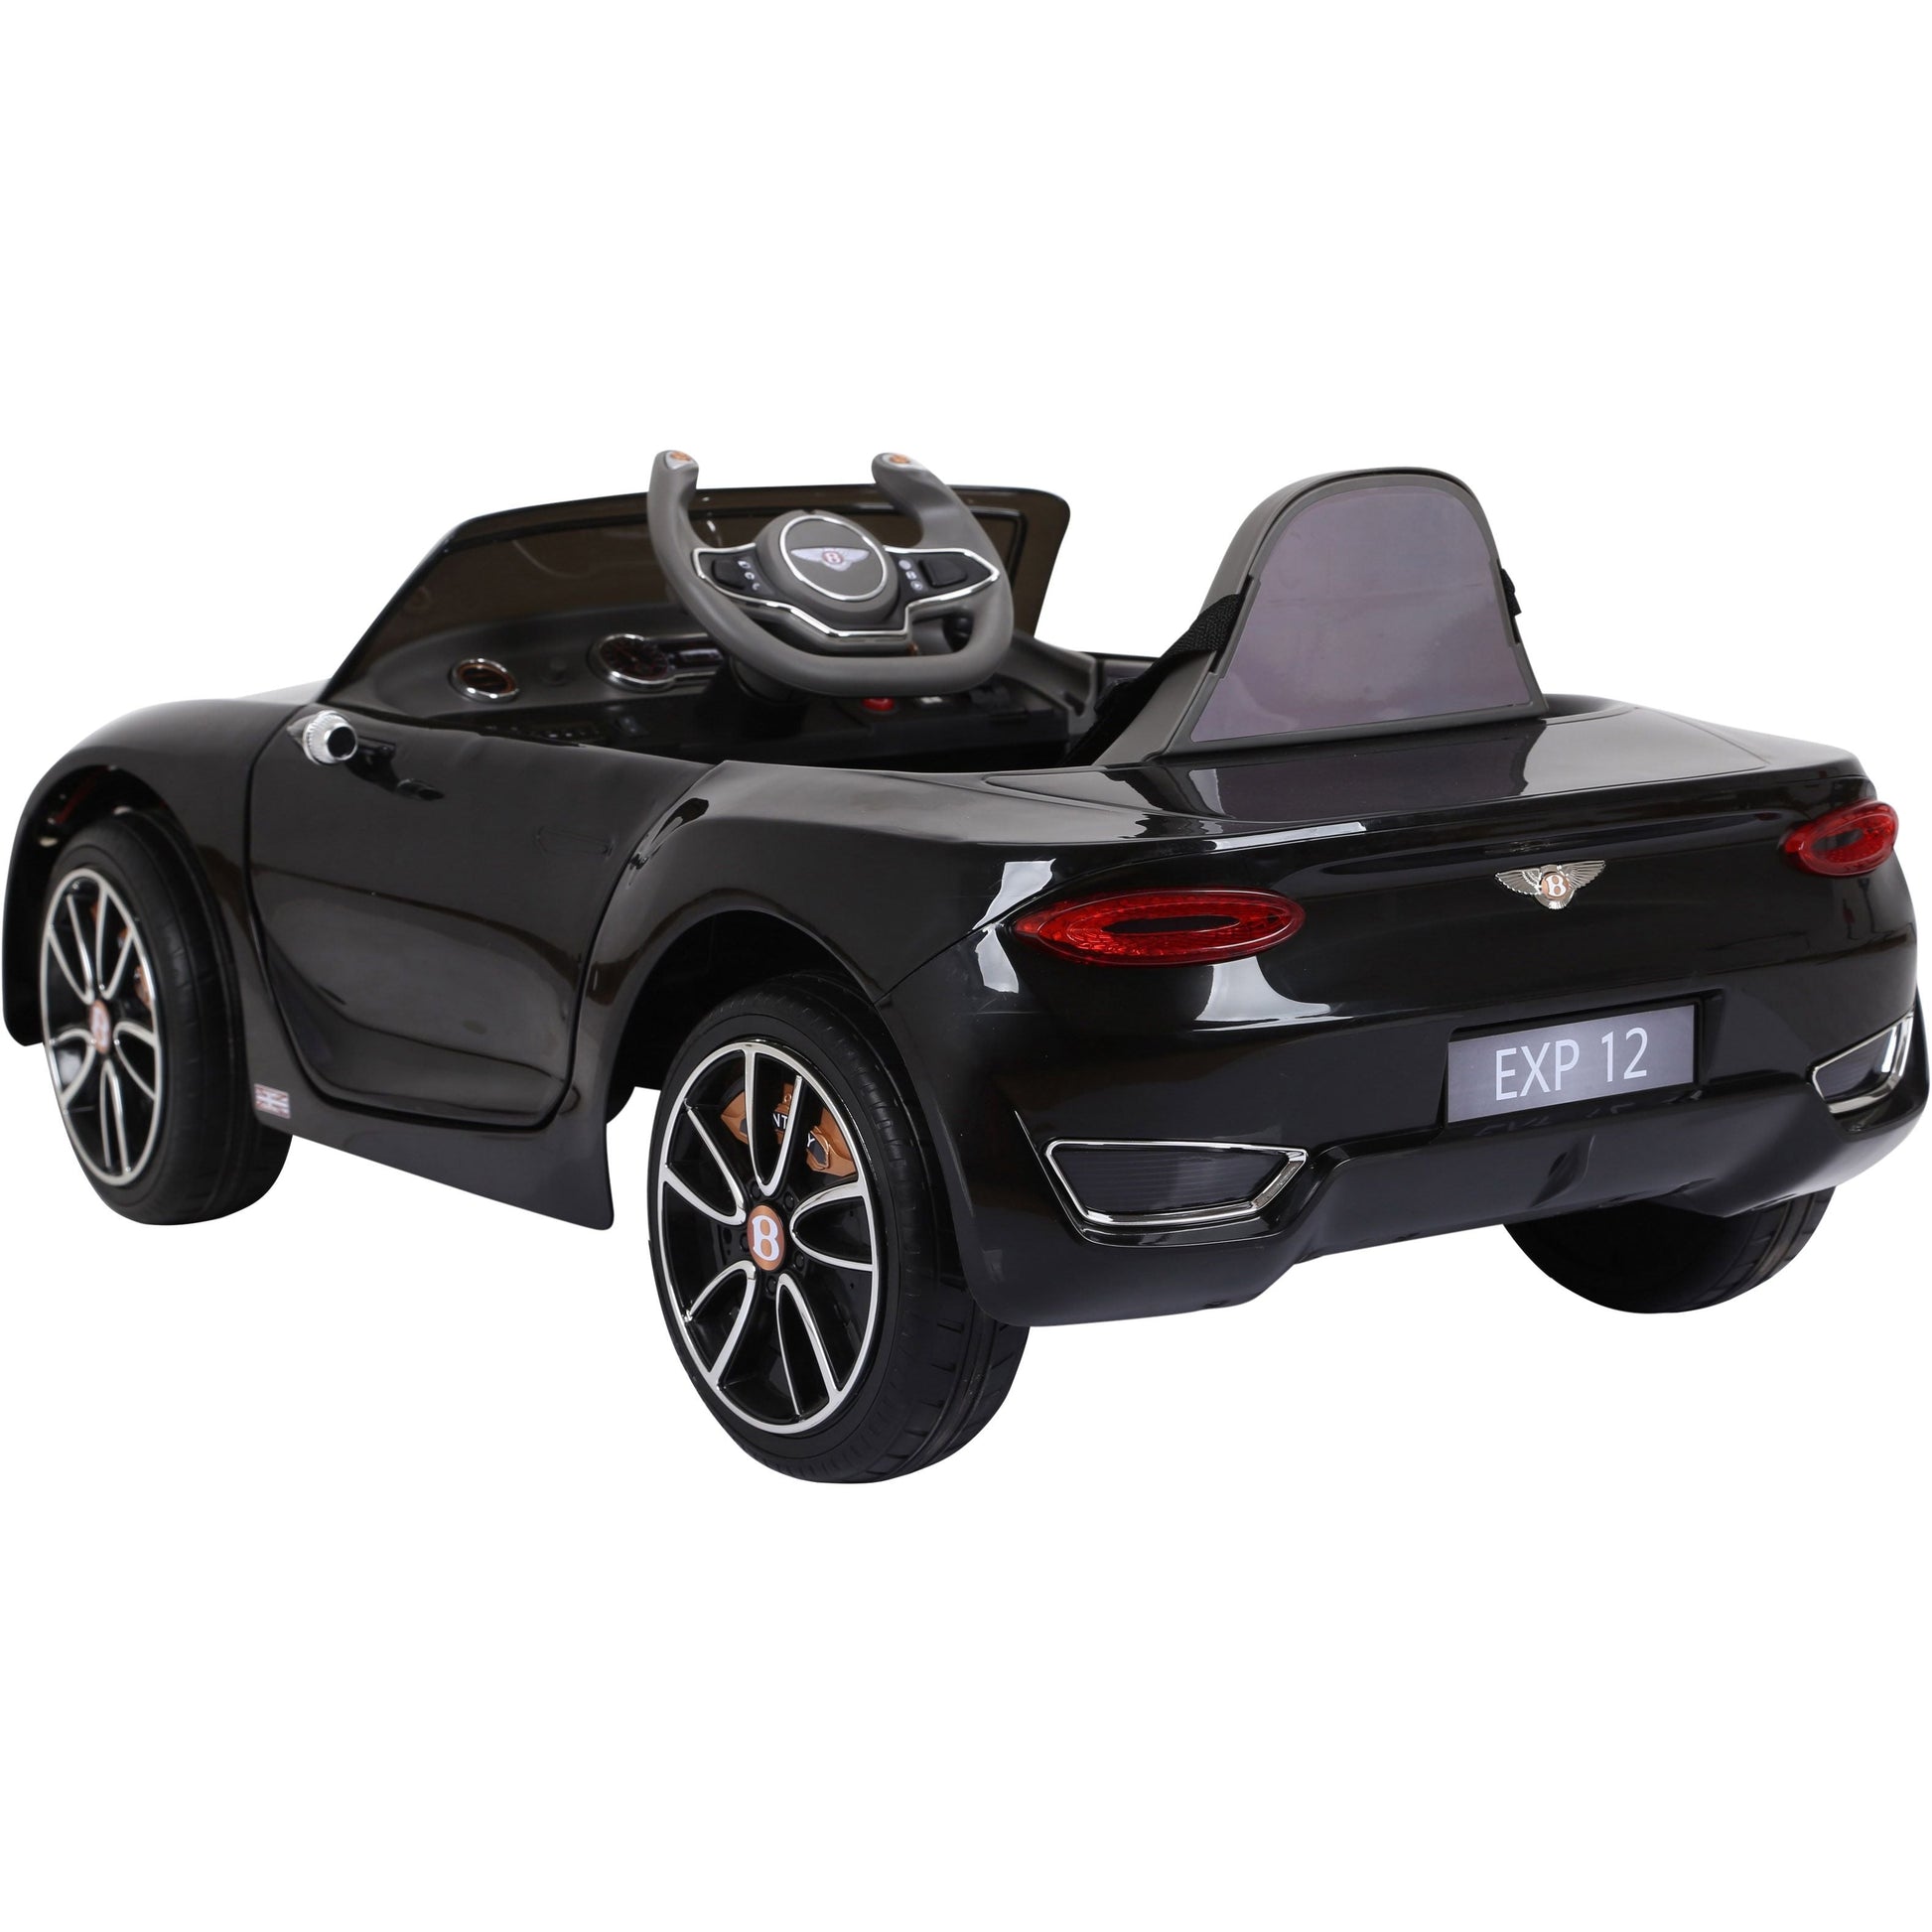 Black Bentley GT EXP12 electric ride-on toy car for kids, isolated on a white background.